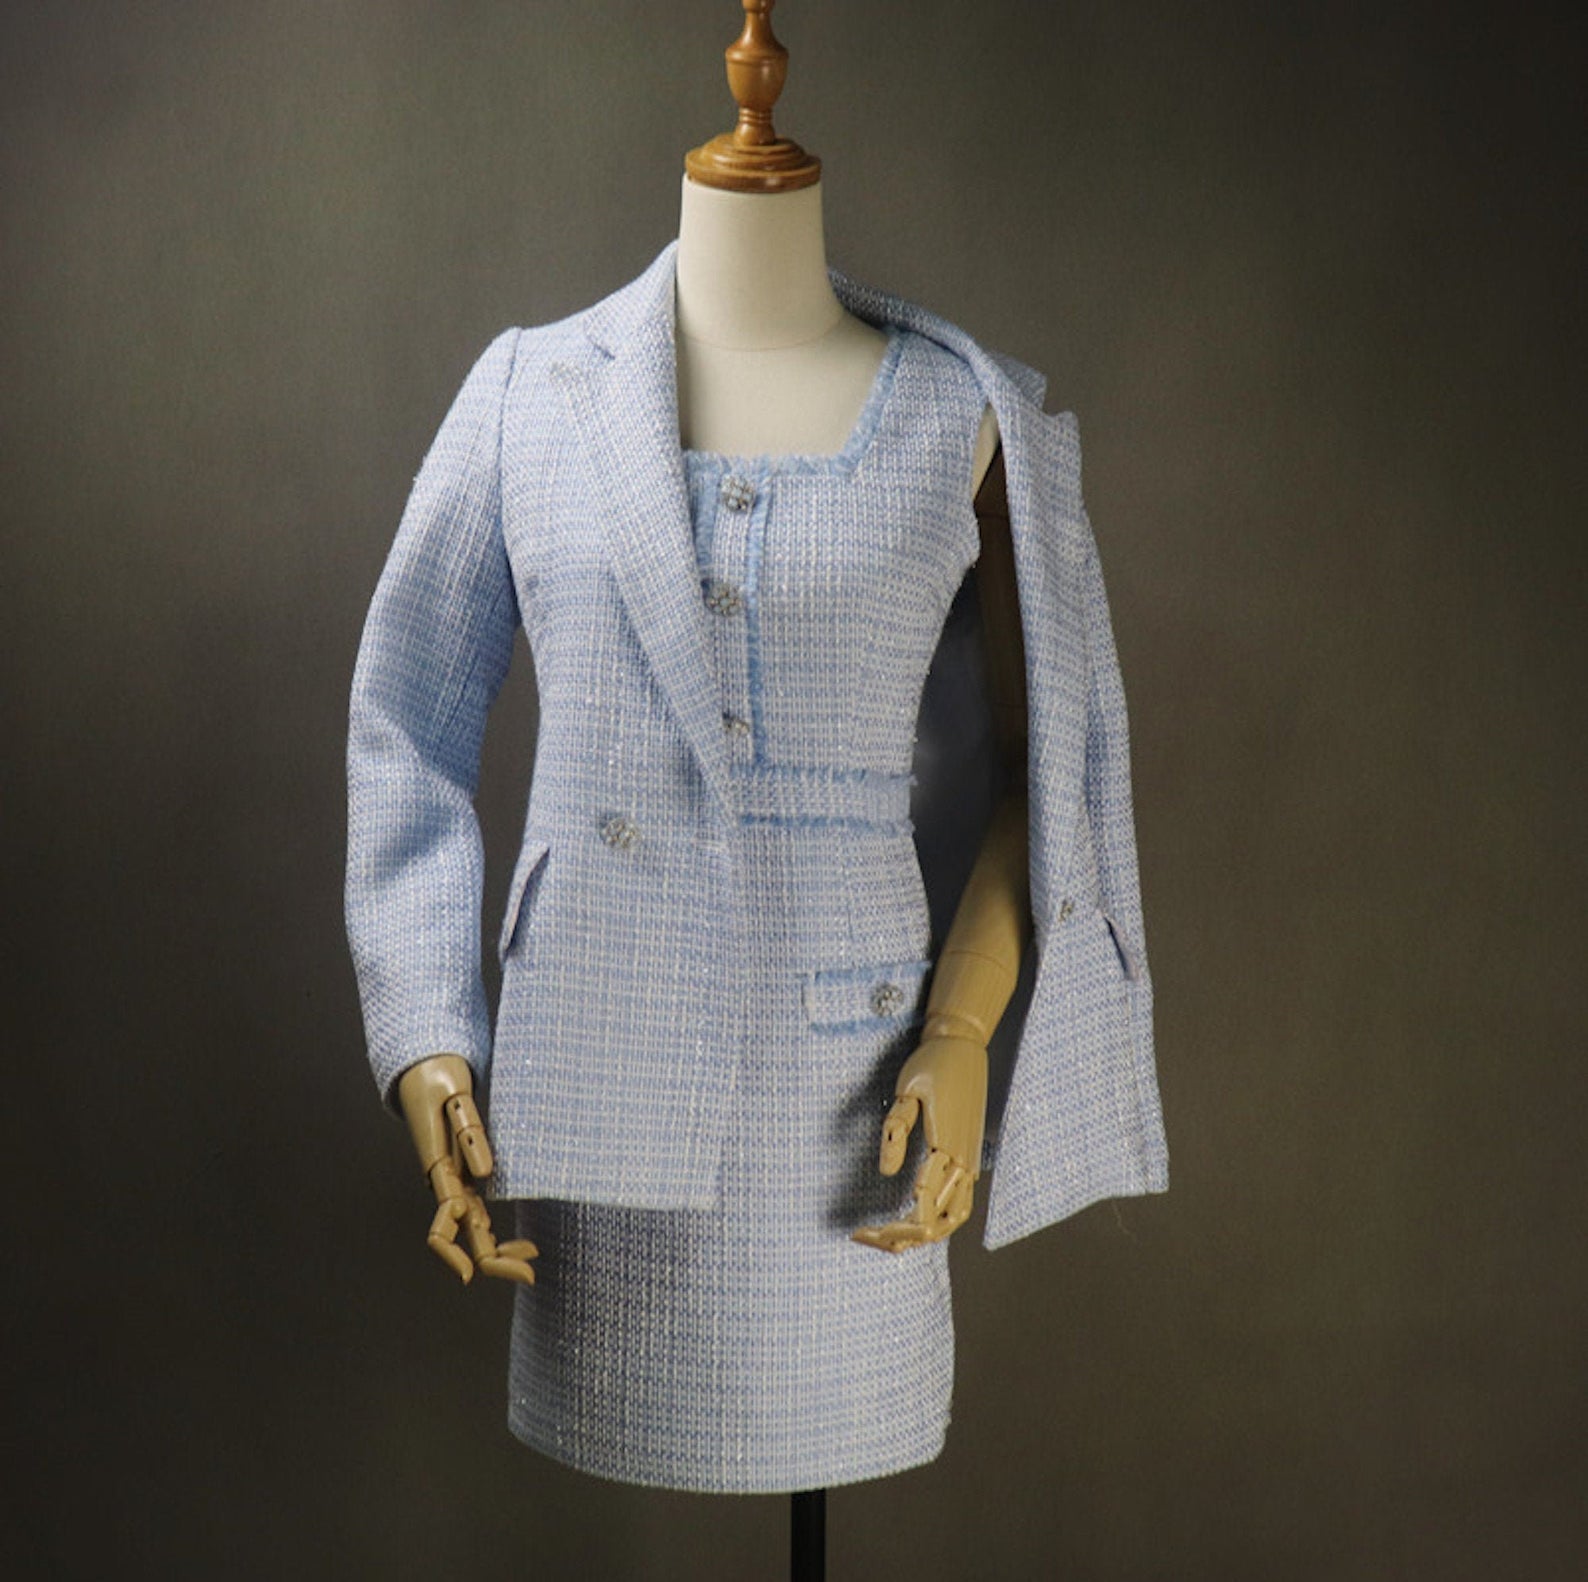 Women's CUSTOM MADE Tweed Blue Jacket Coat Blazer+ Dress/ Skirt/ Trousers  UK CUSTOMER SERVICE!   Women's CUSTOM MADE Tweed Blue Jacket Coat Blazer+ Dress/ Skirt/ Trousers, can worn for official use, interview , ceremony and college inauguration. Dry Cleaning and no machine washable.   We offer Dress, Shorts, Skirts, Trousers for the suit